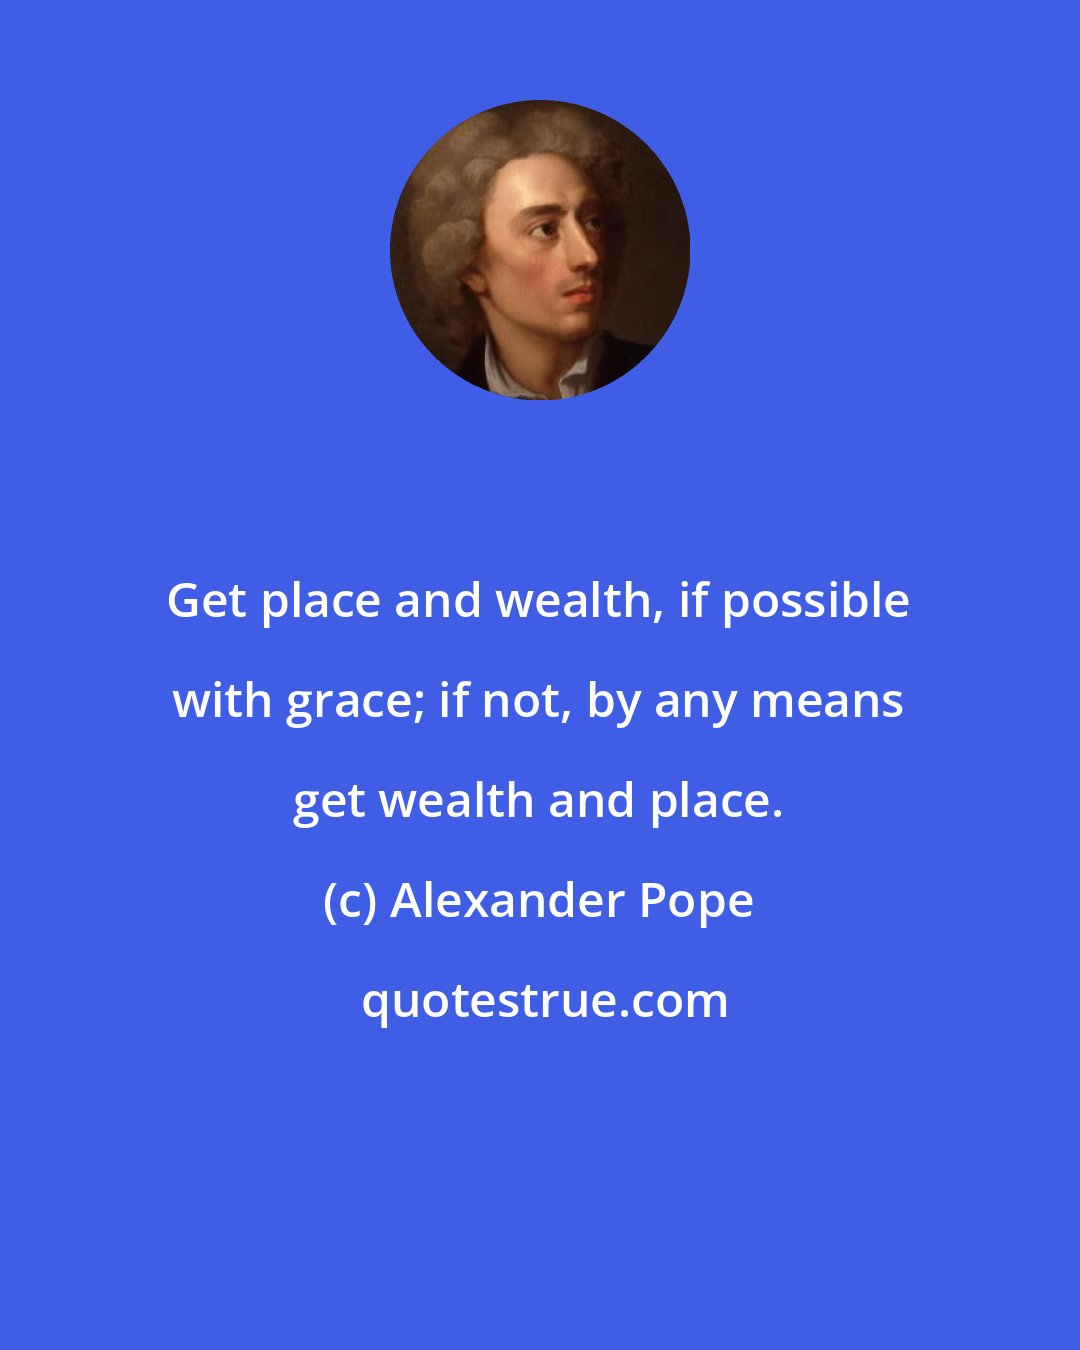 Alexander Pope: Get place and wealth, if possible with grace; if not, by any means get wealth and place.